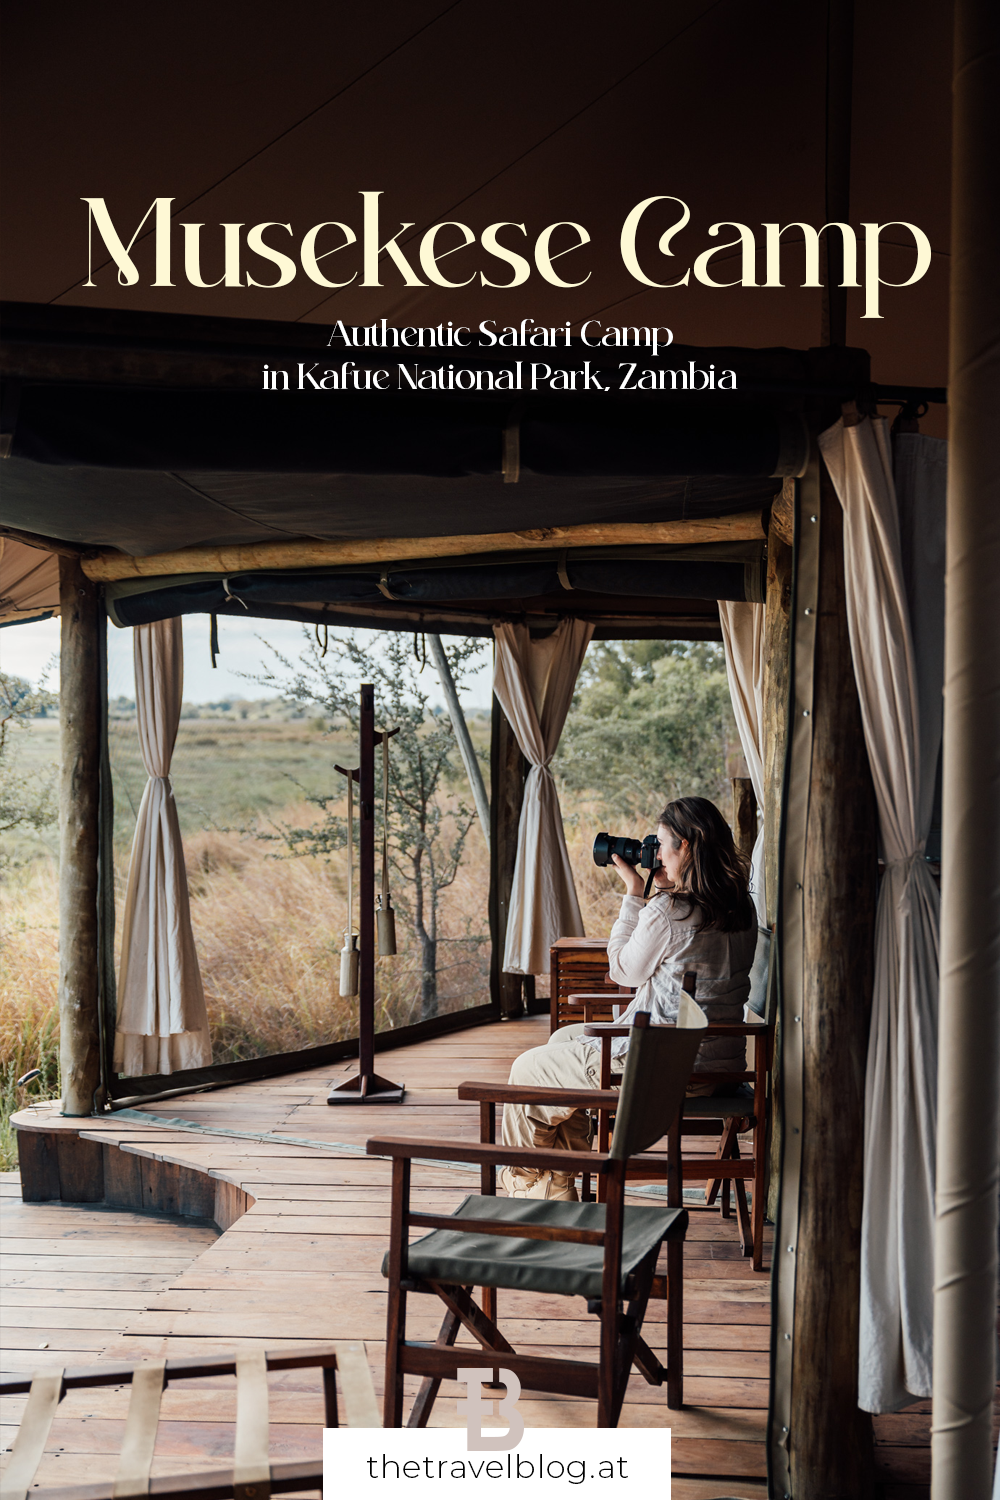 On safari at Musekese Camp in Kafue National Park Zambia: A travel guide by thetravelblog.at